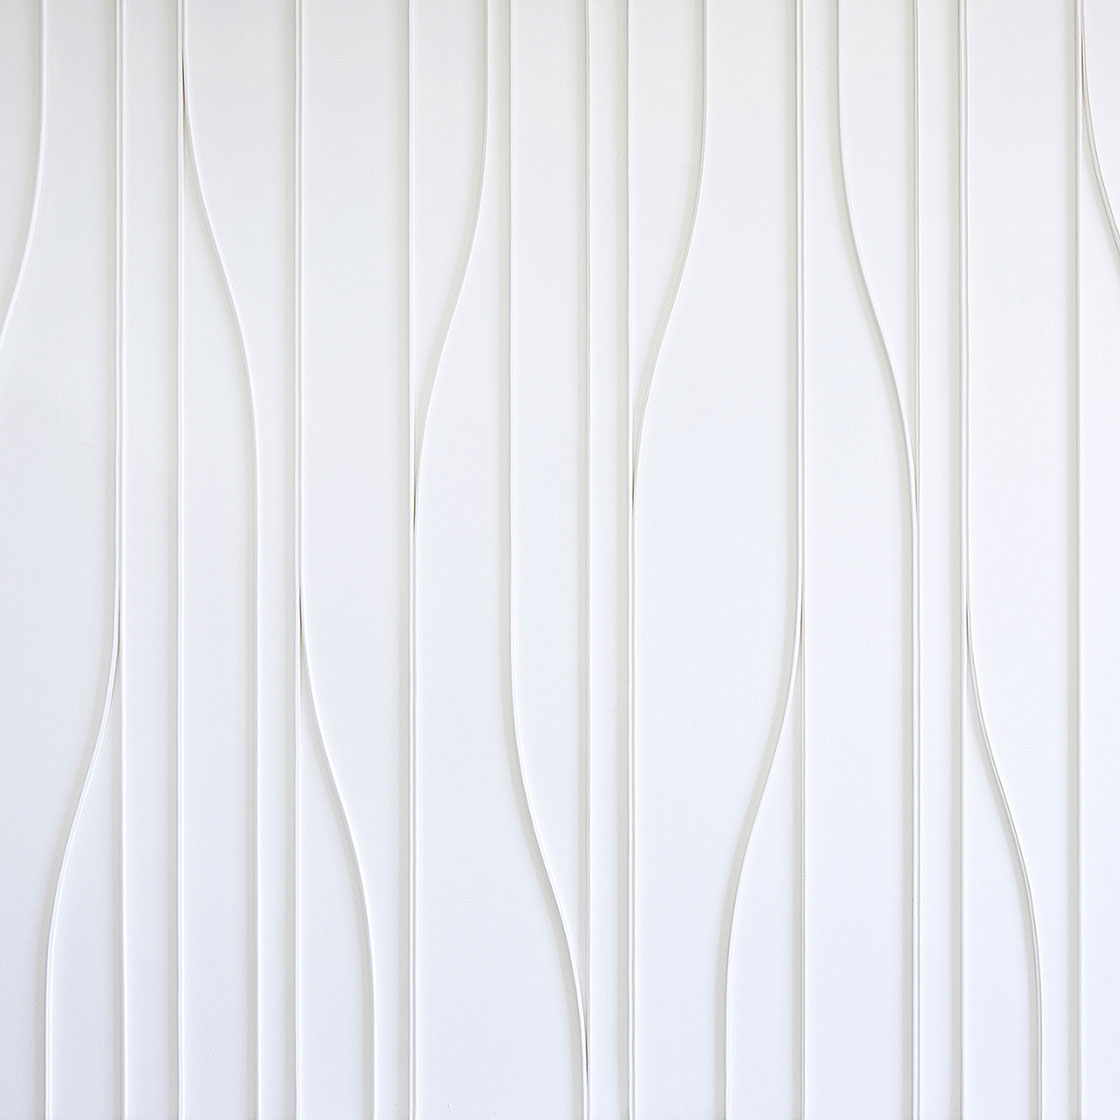 White felt wall covering with straight and slightly curved vertical lines